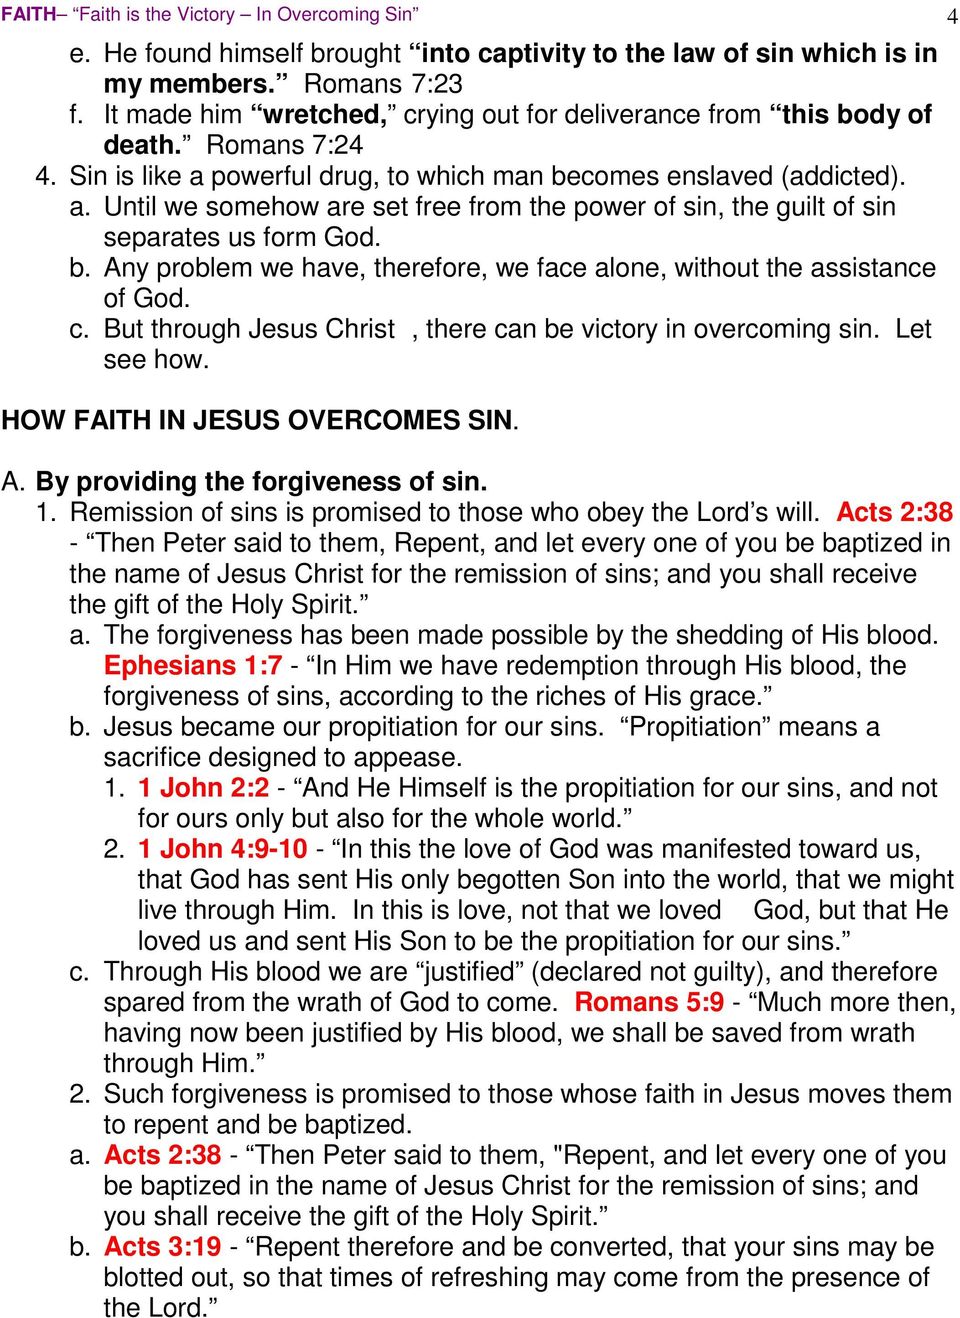 b. Any problem we have, therefore, we face alone, without the assistance of God. c. But through Jesus Christ, there can be victory in overcoming sin. Let see how. HOW FAITH IN JESUS OVERCOMES SIN. A. By providing the forgiveness of sin.